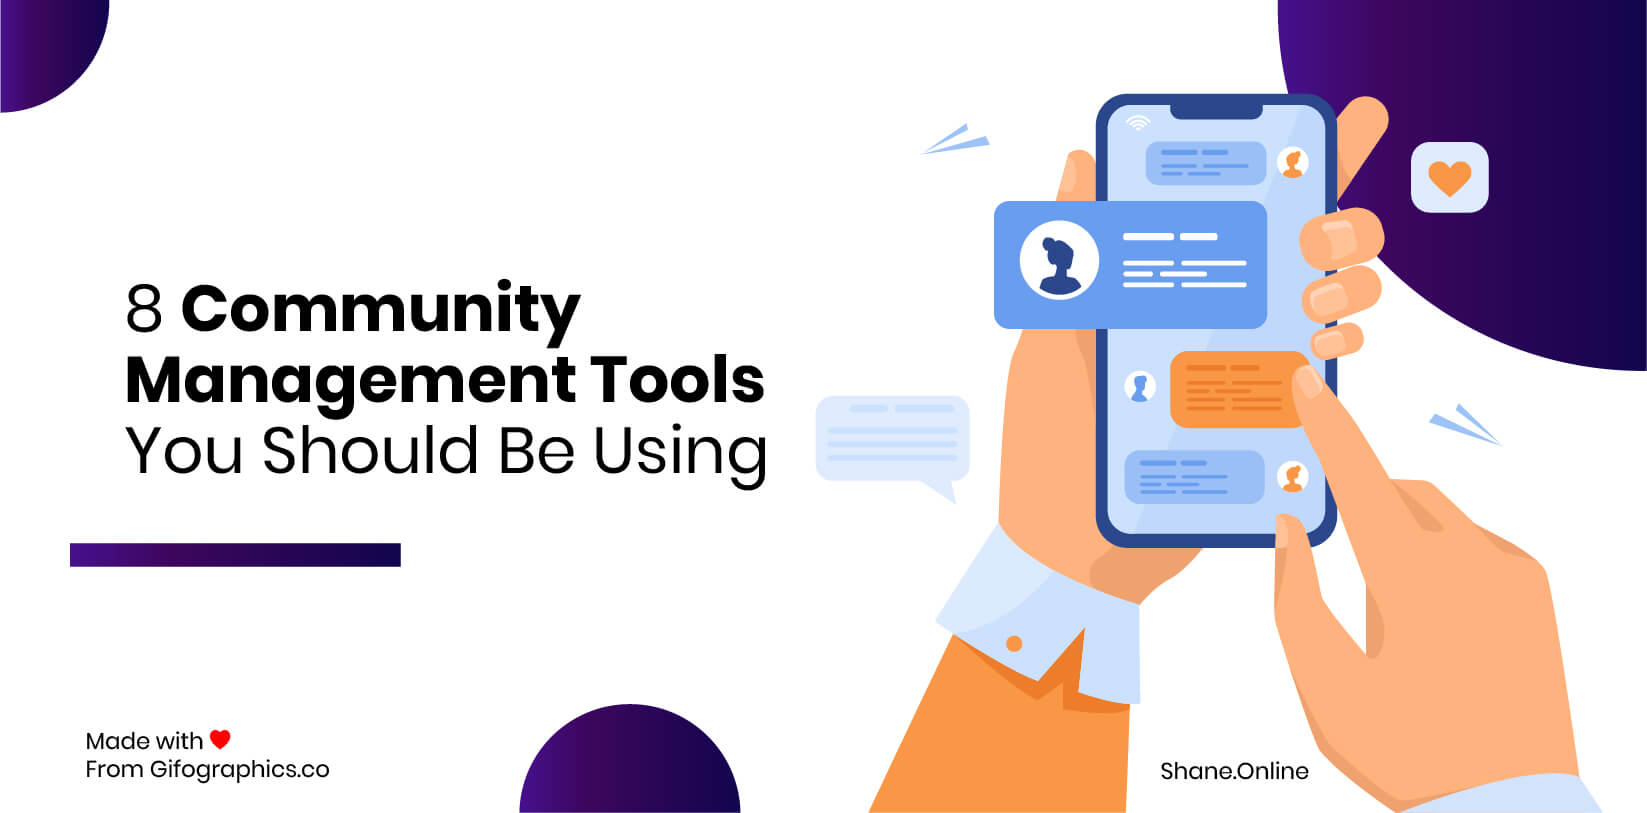 8 Community Management Tools You Should Be Using in 2021